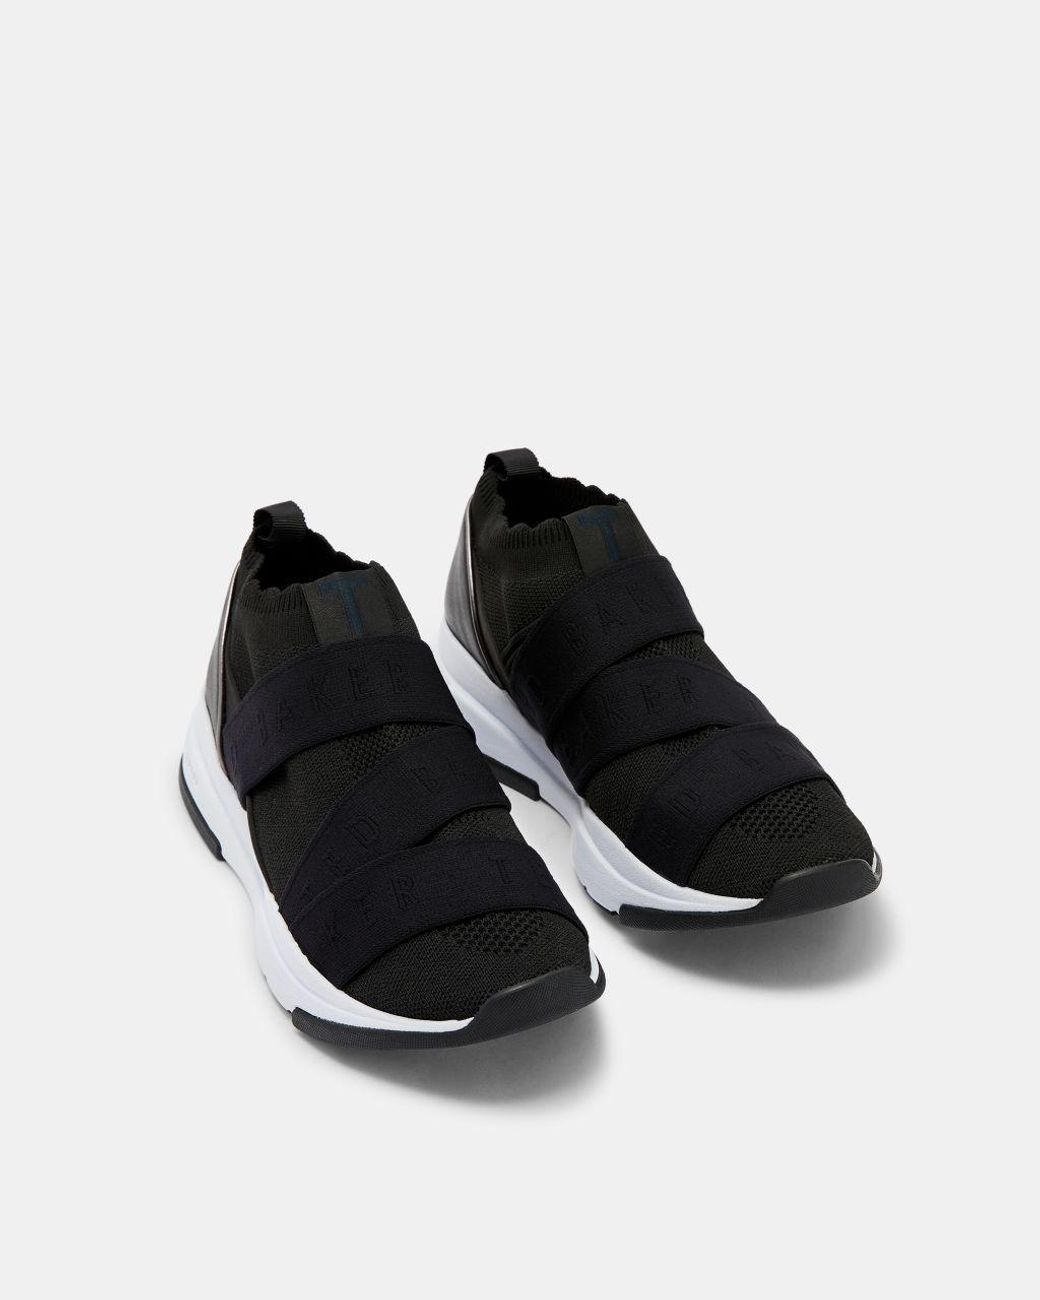 ted baker running trainers